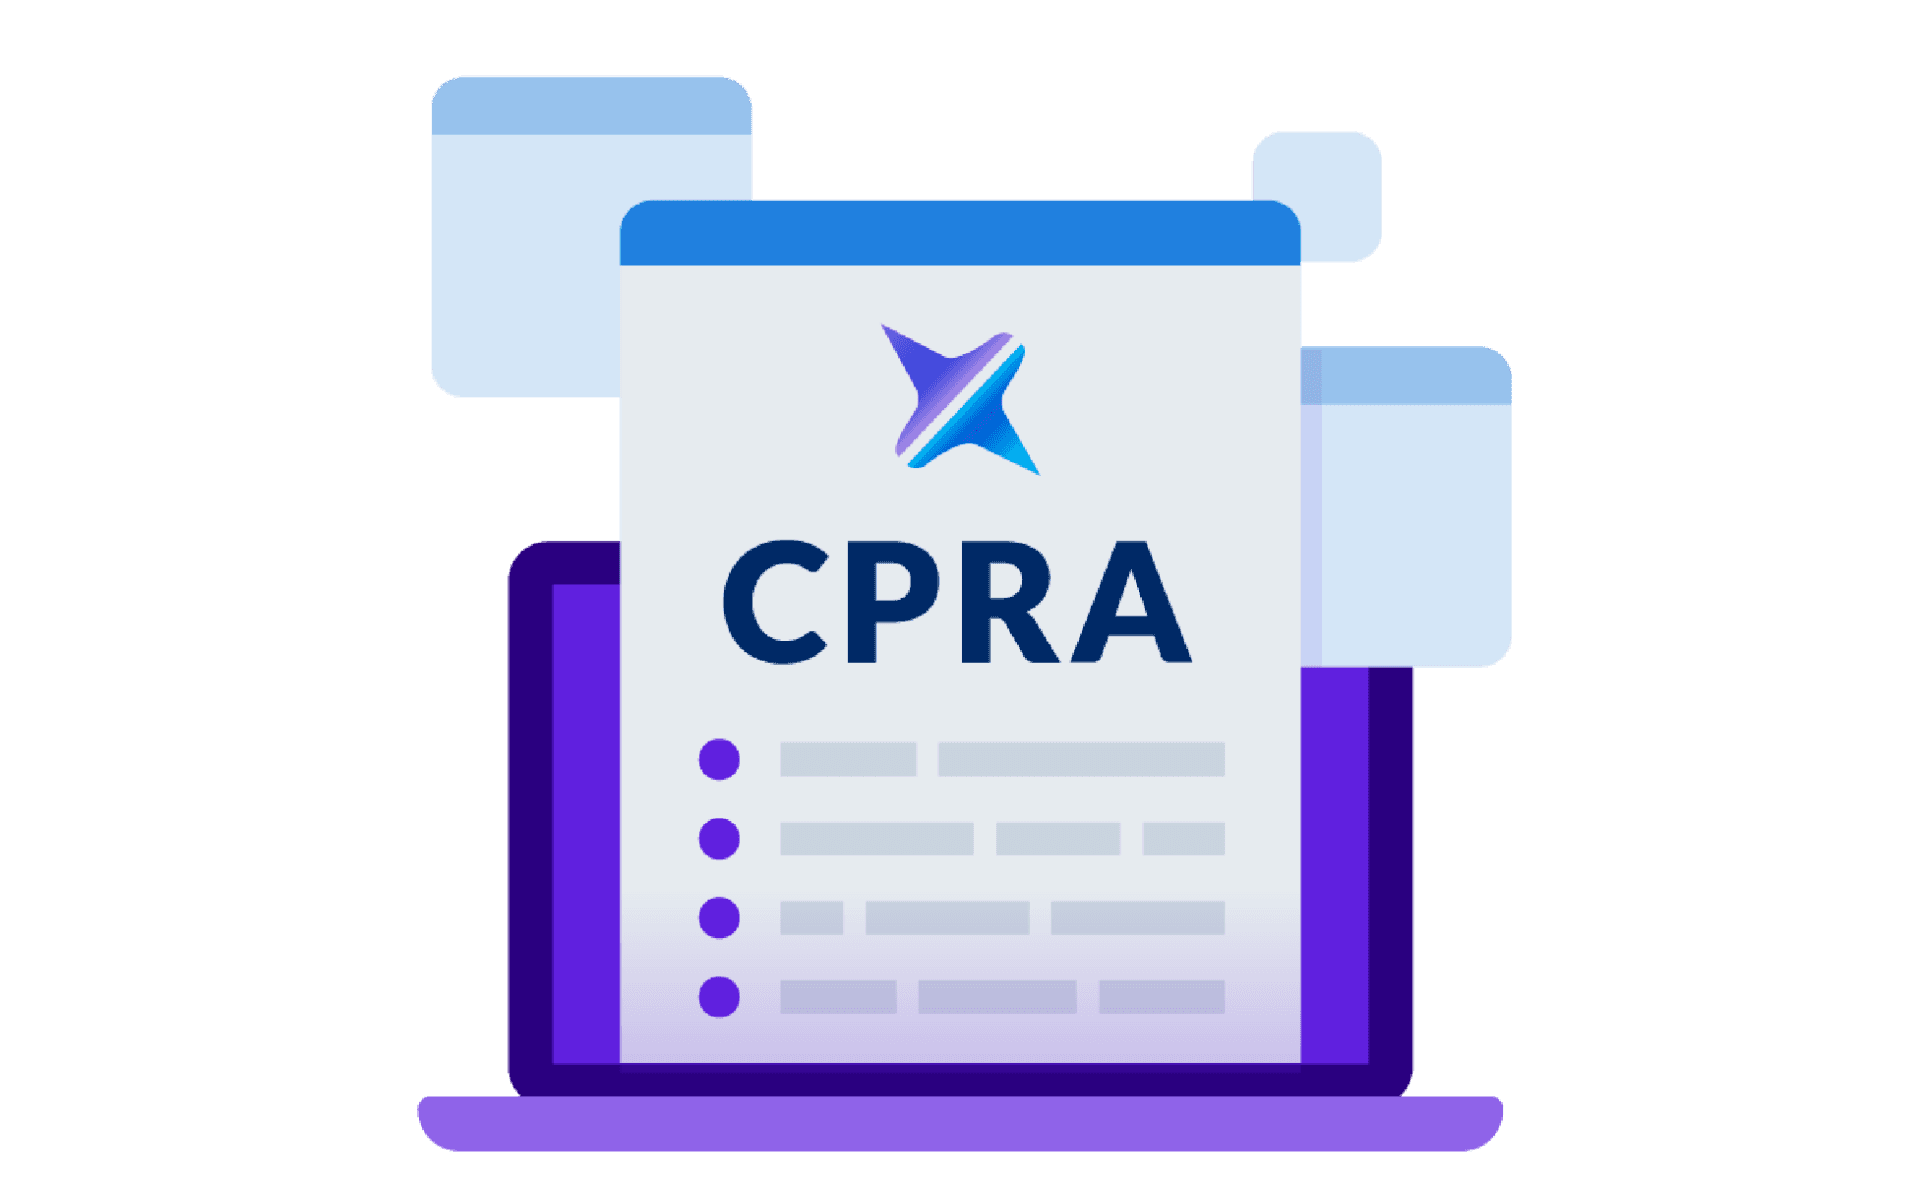 Checking CPRA rules